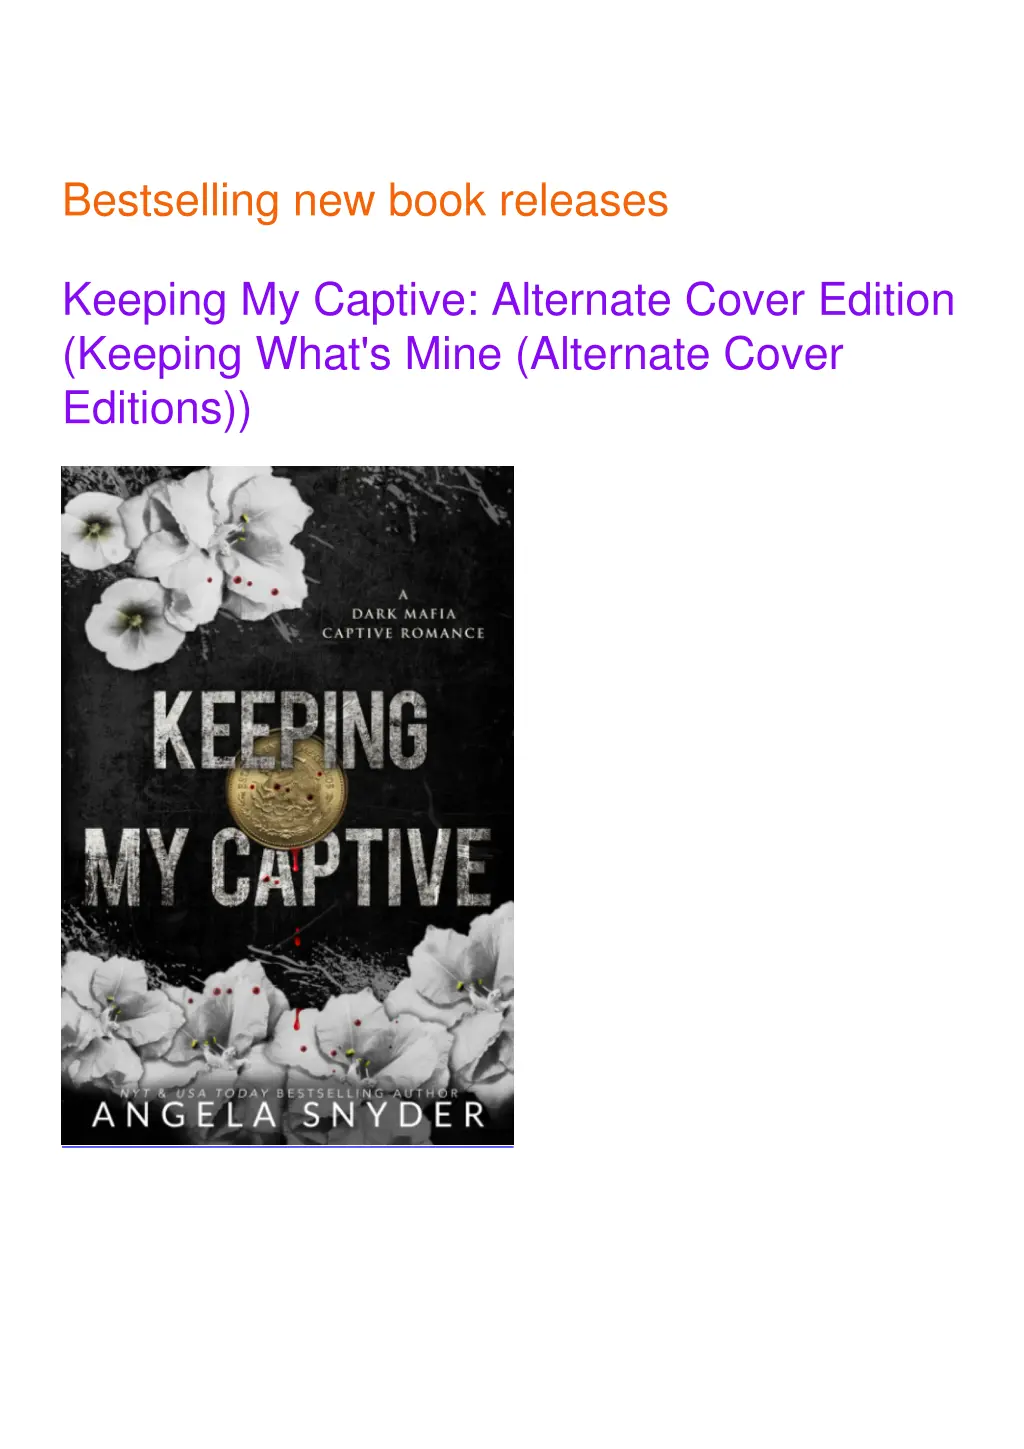 bestselling new book releases keeping my captive